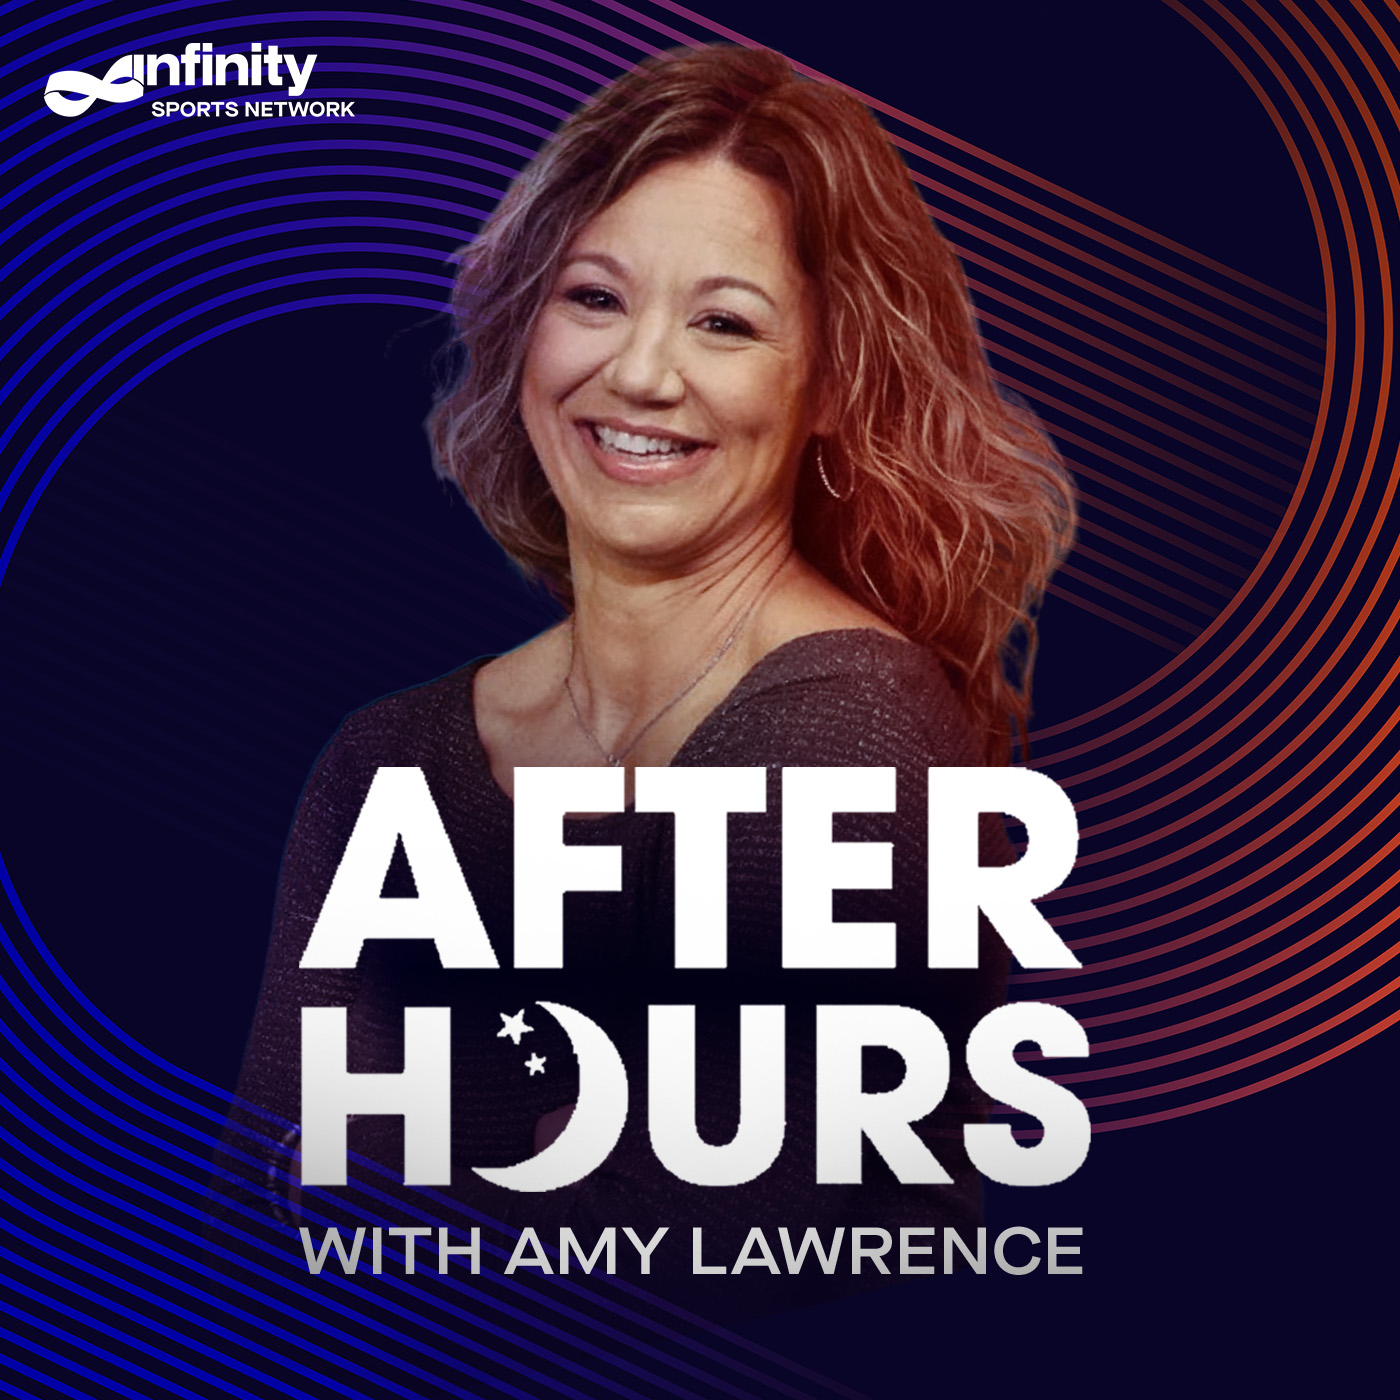 5/14/21 After Hours with Amy Lawrence PODCAST: Hour 4